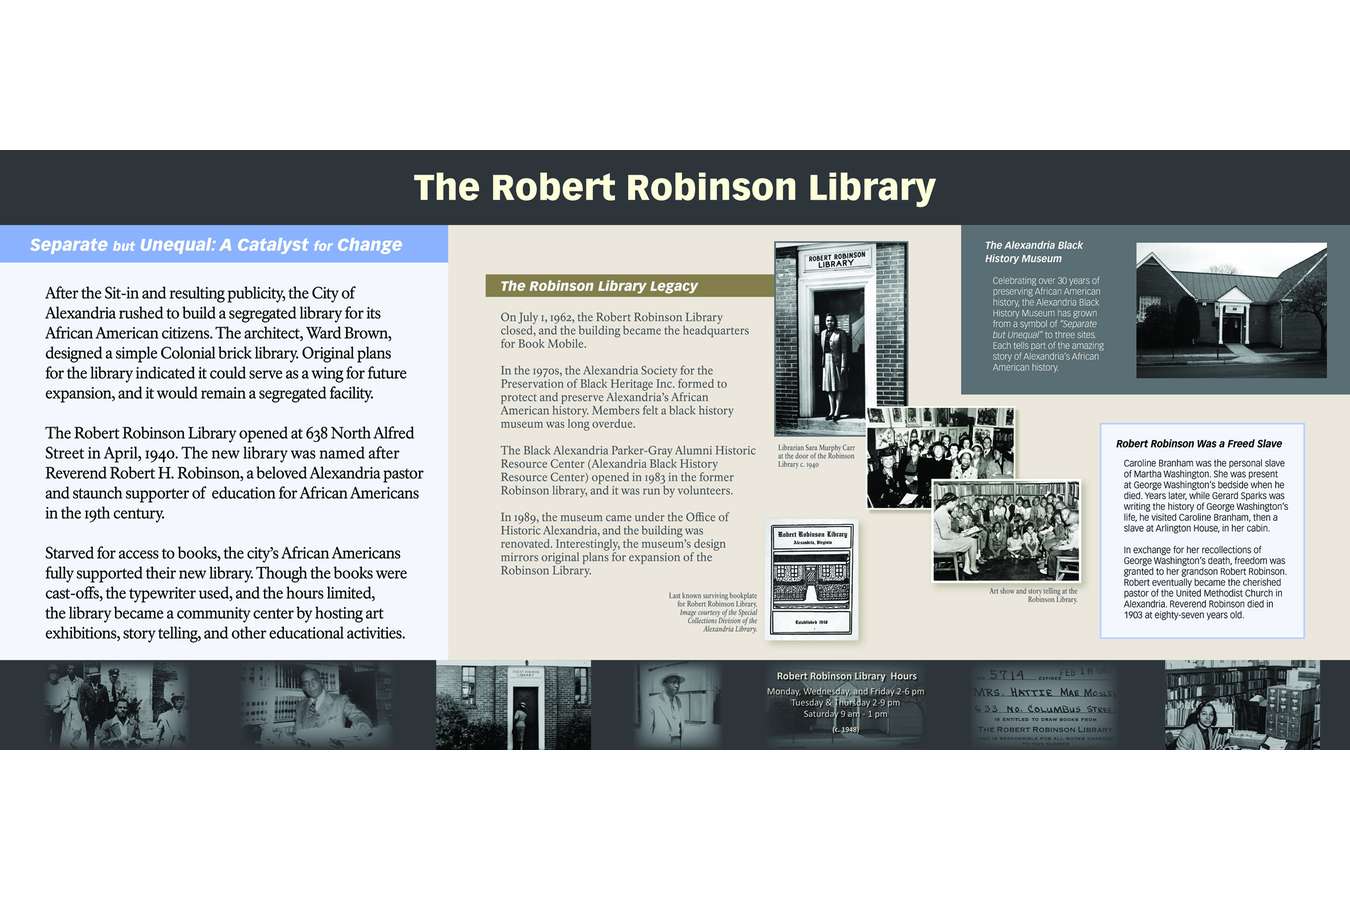 Robinson Library : The Robinson Library built as a result of the 1939 Sit-in, now houses ABHM